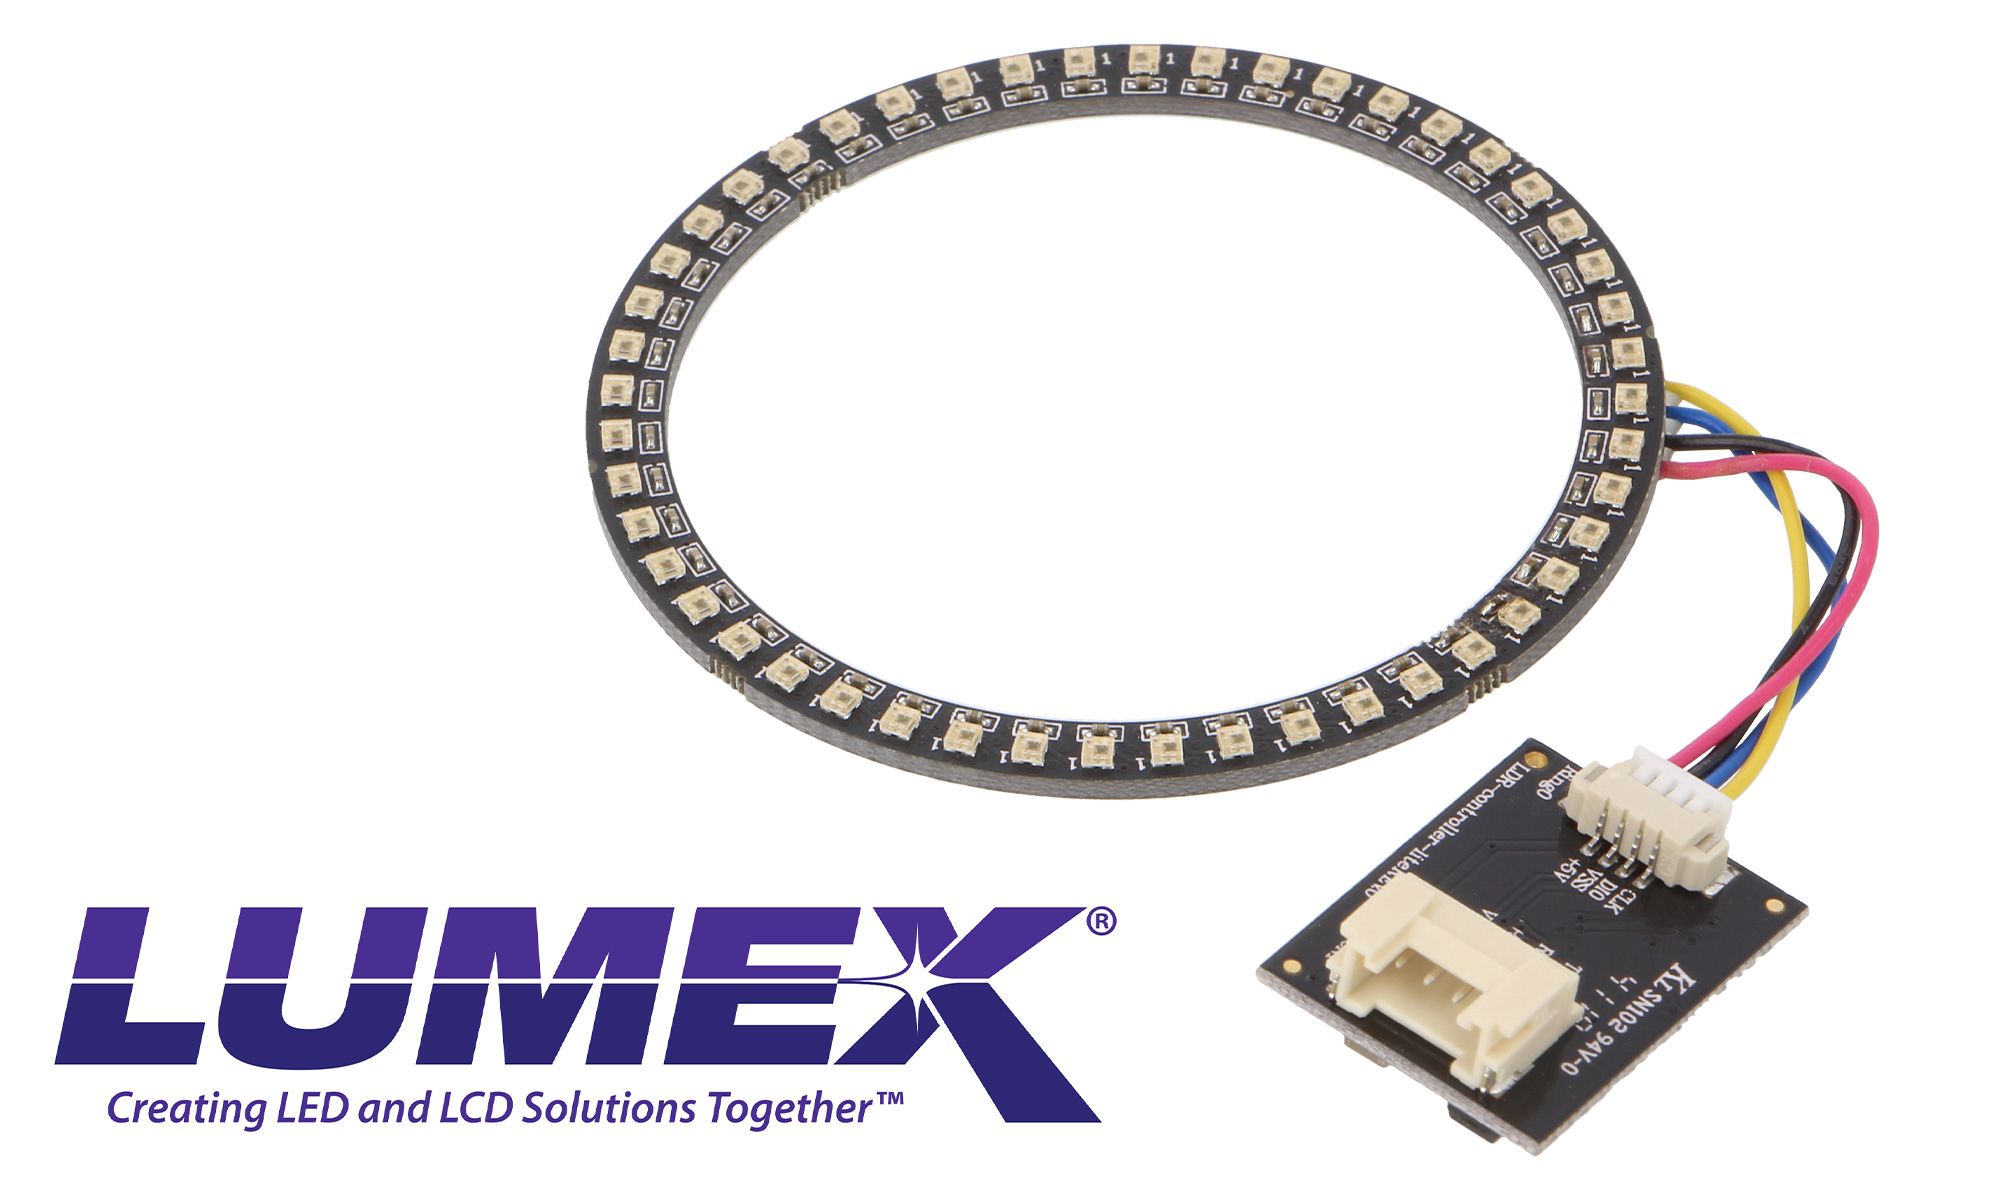 Programmable RGB LED modules by Lumex